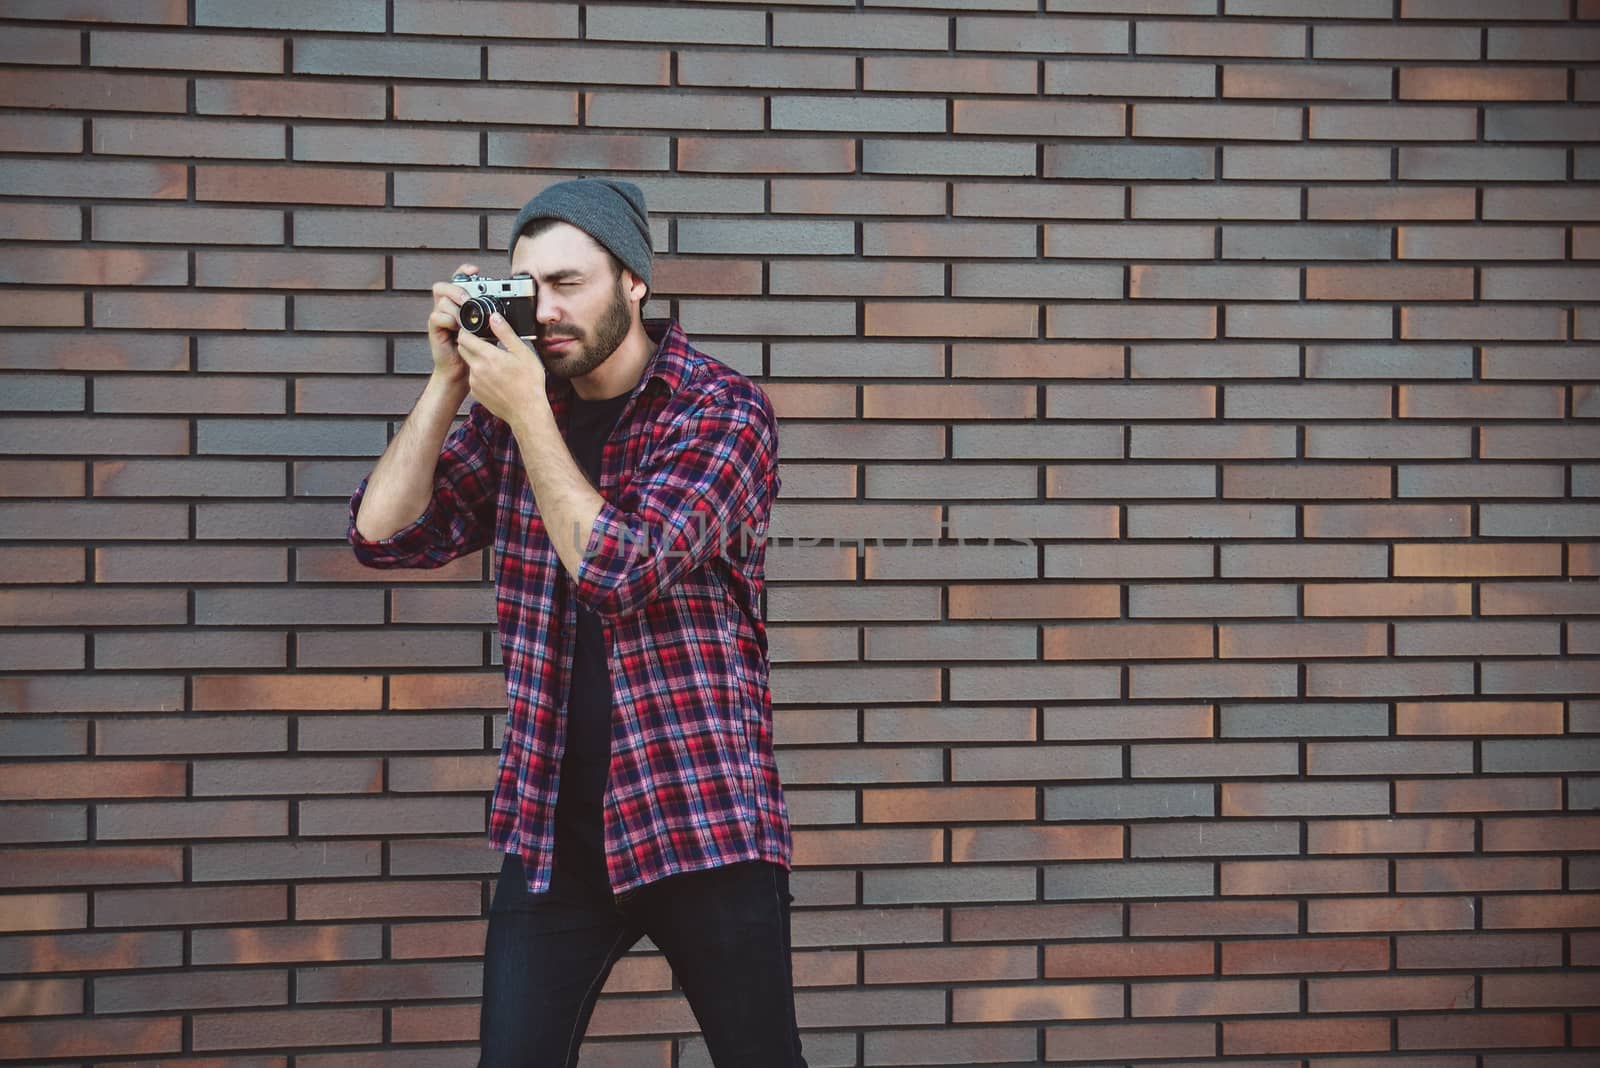 Say cheese, hipster fashion photographer man holding retro camera